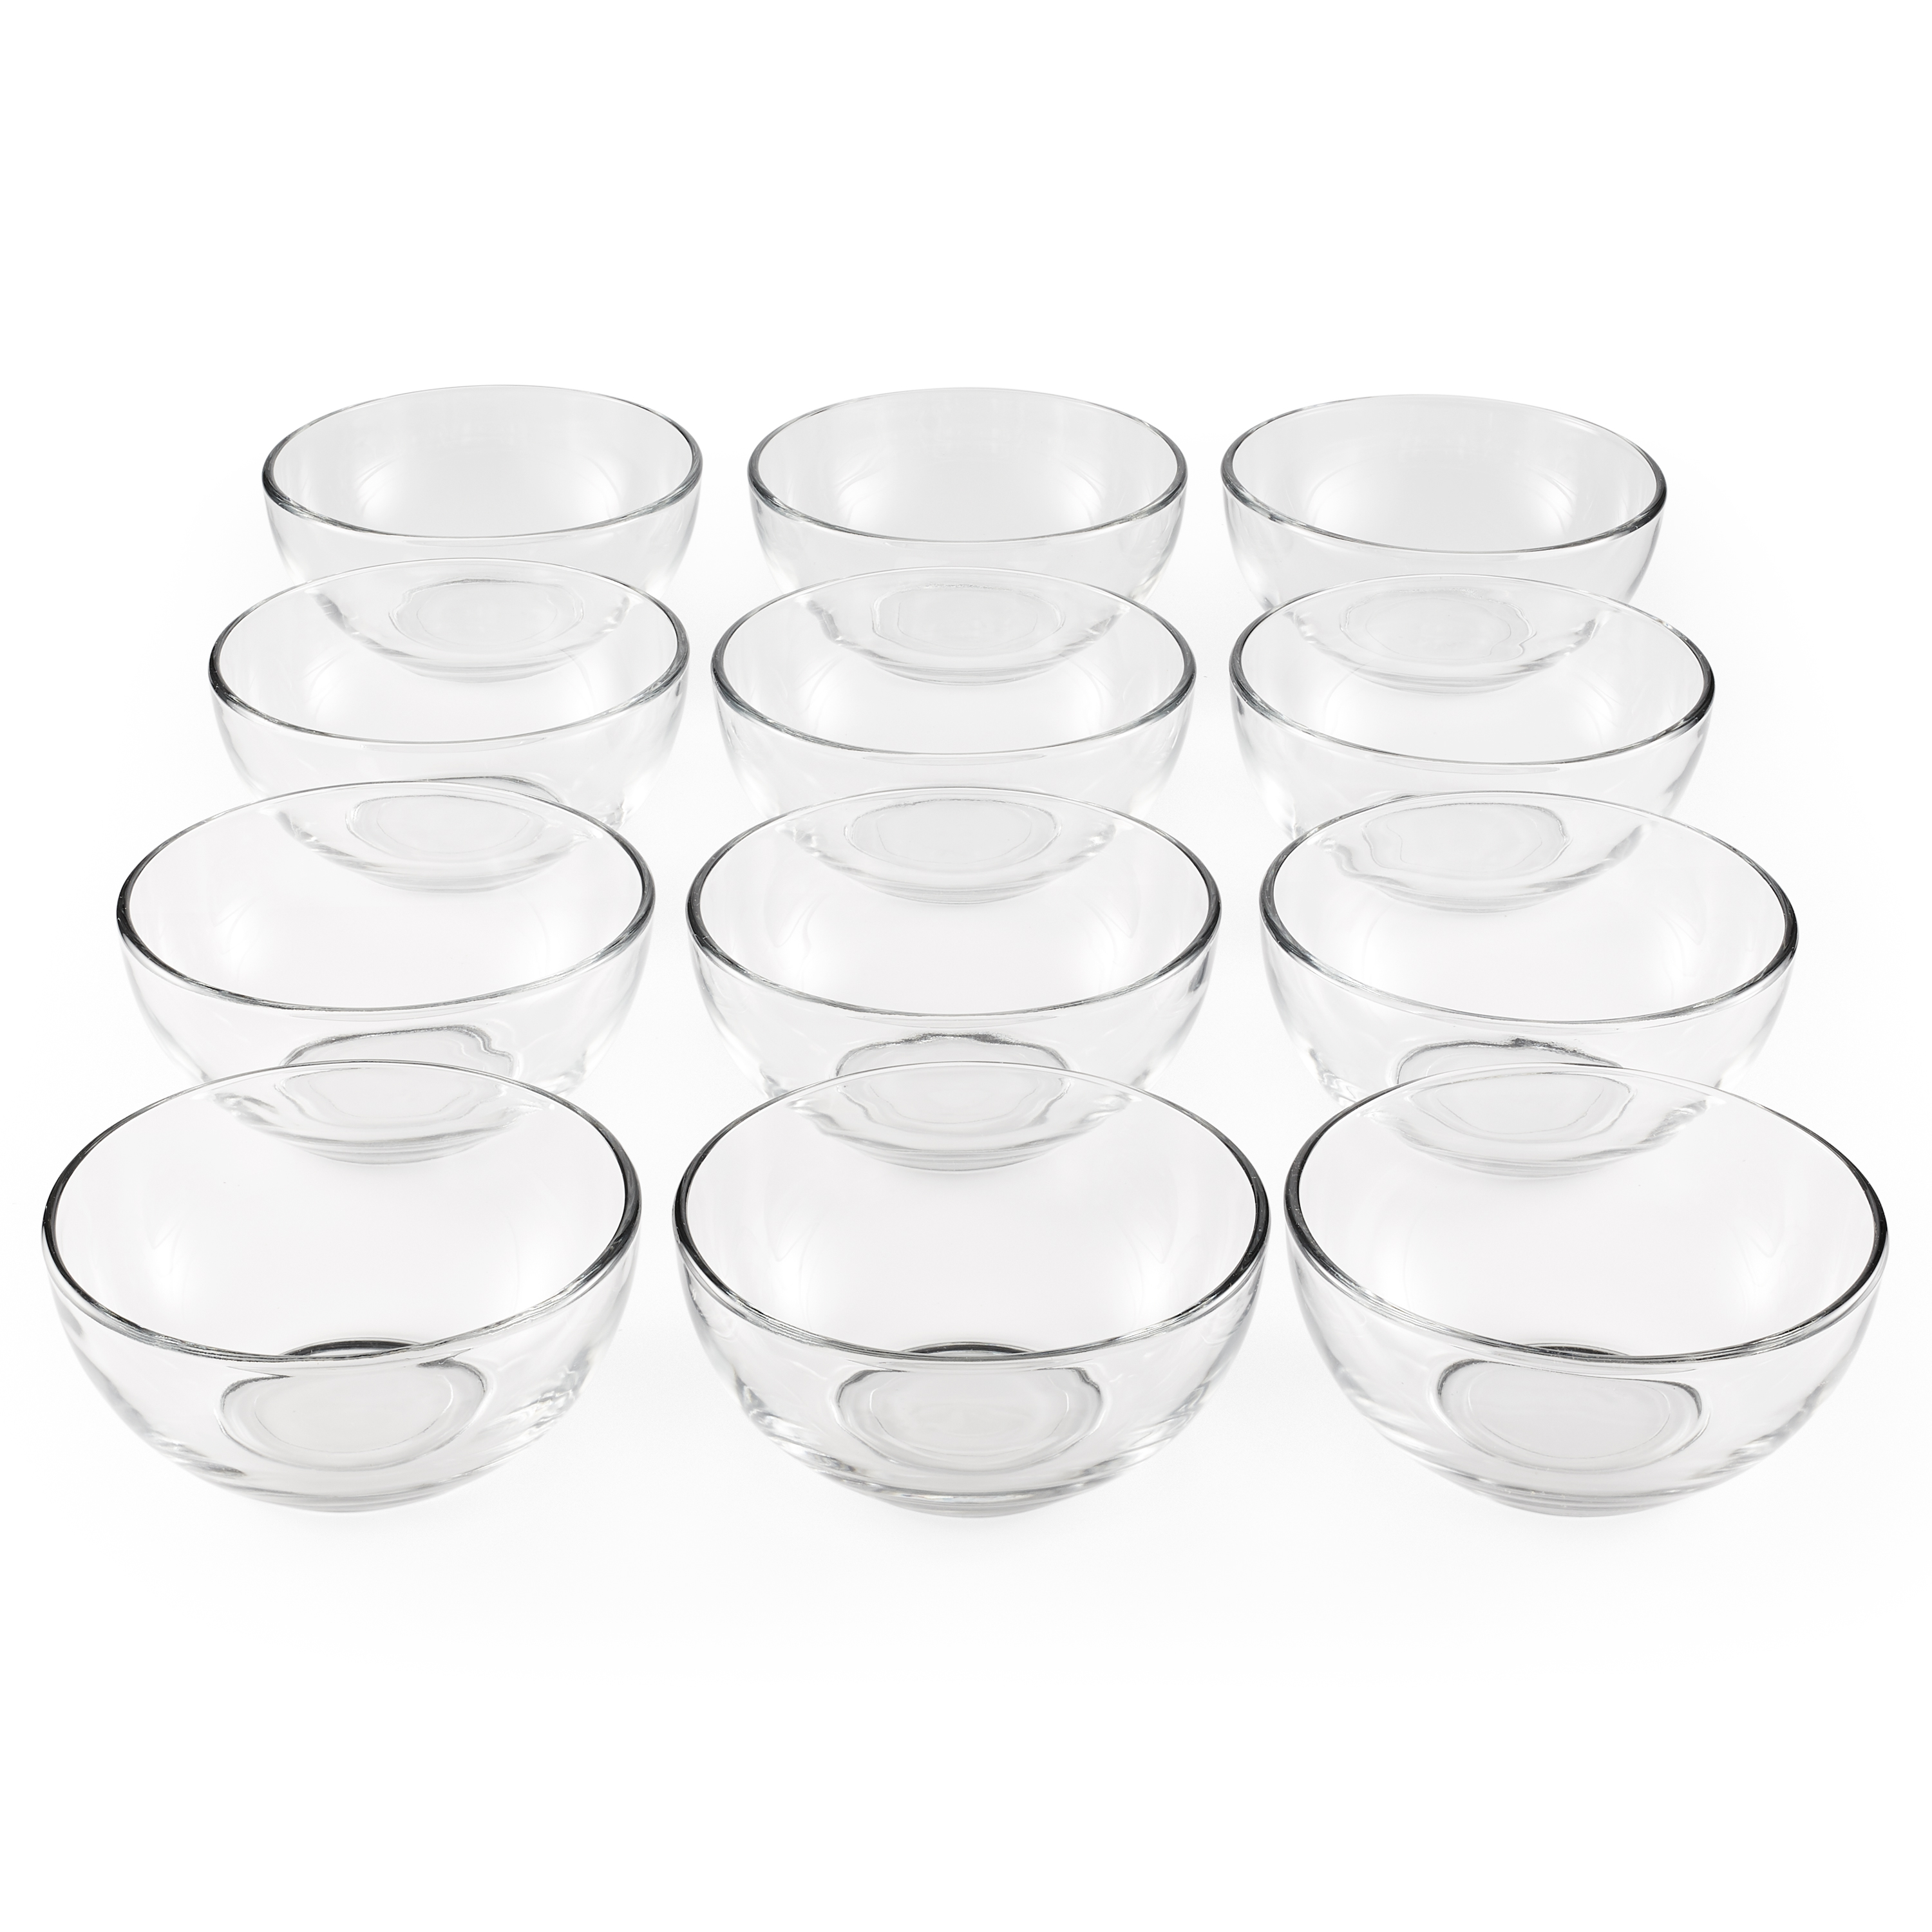 Mainstays Round Glass Bowls Catering Pack, Set of 12 - image 1 of 10